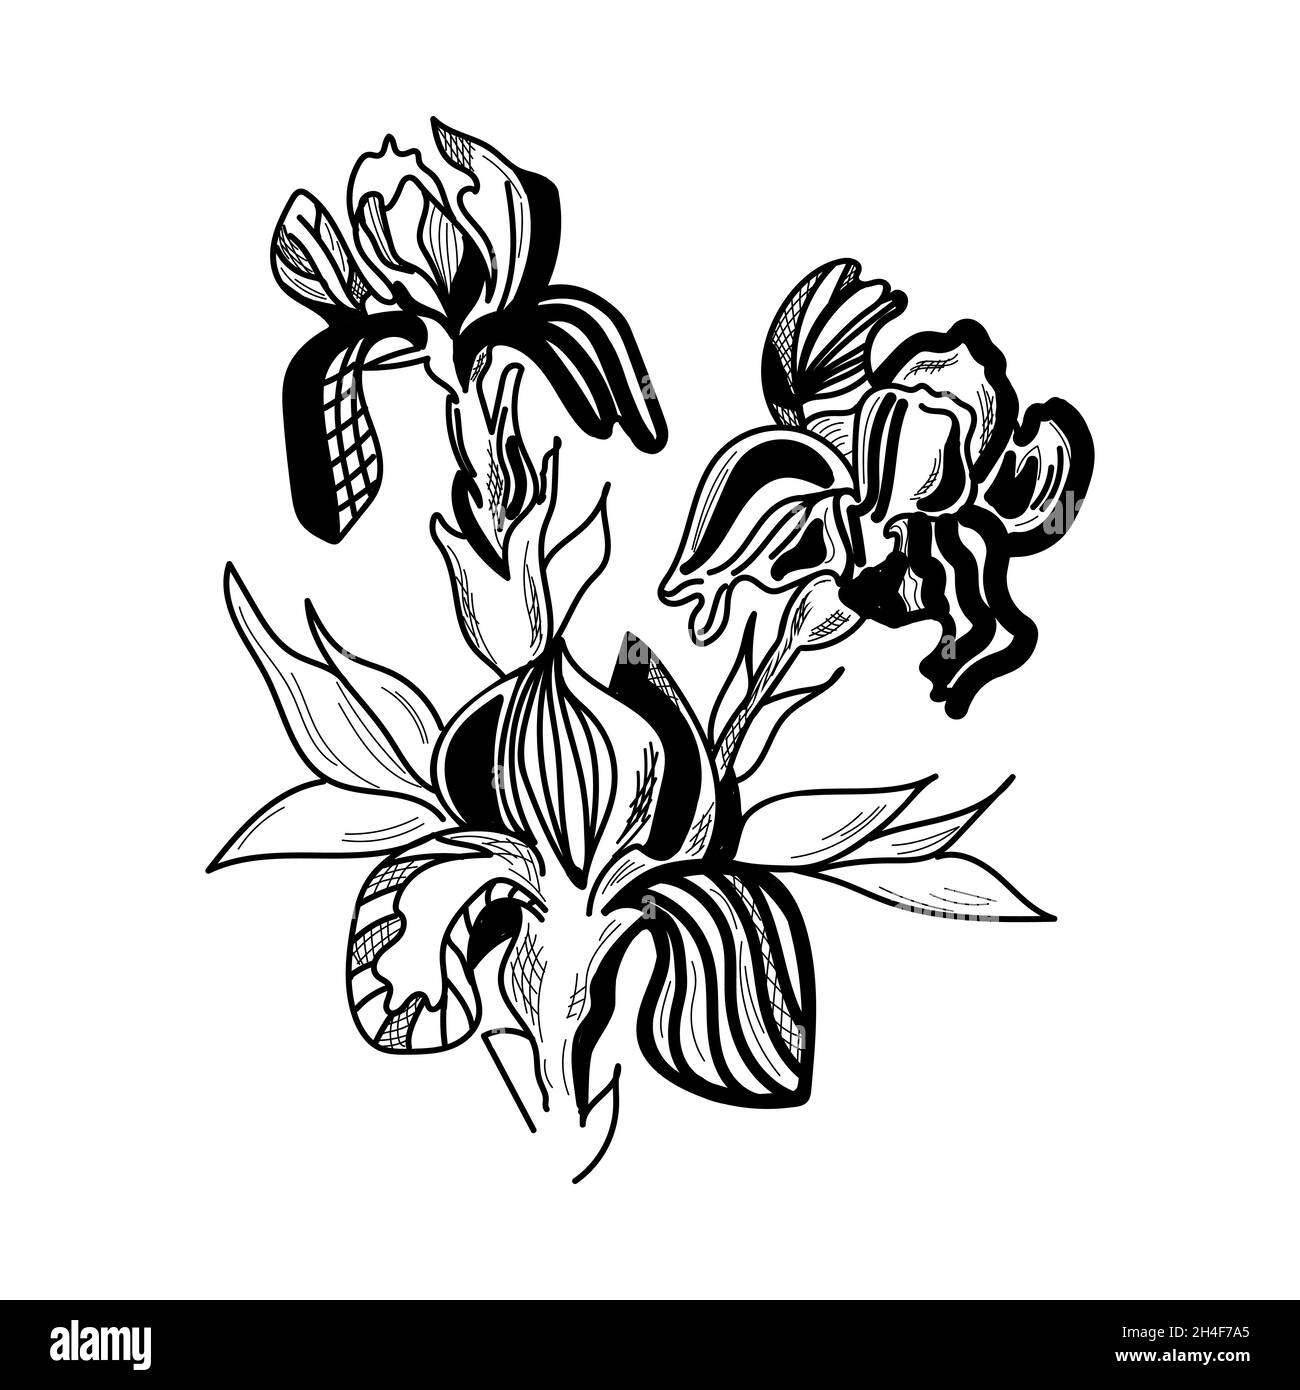 Iris flowers are drawn graphically. Vector illustration. Stock Vector